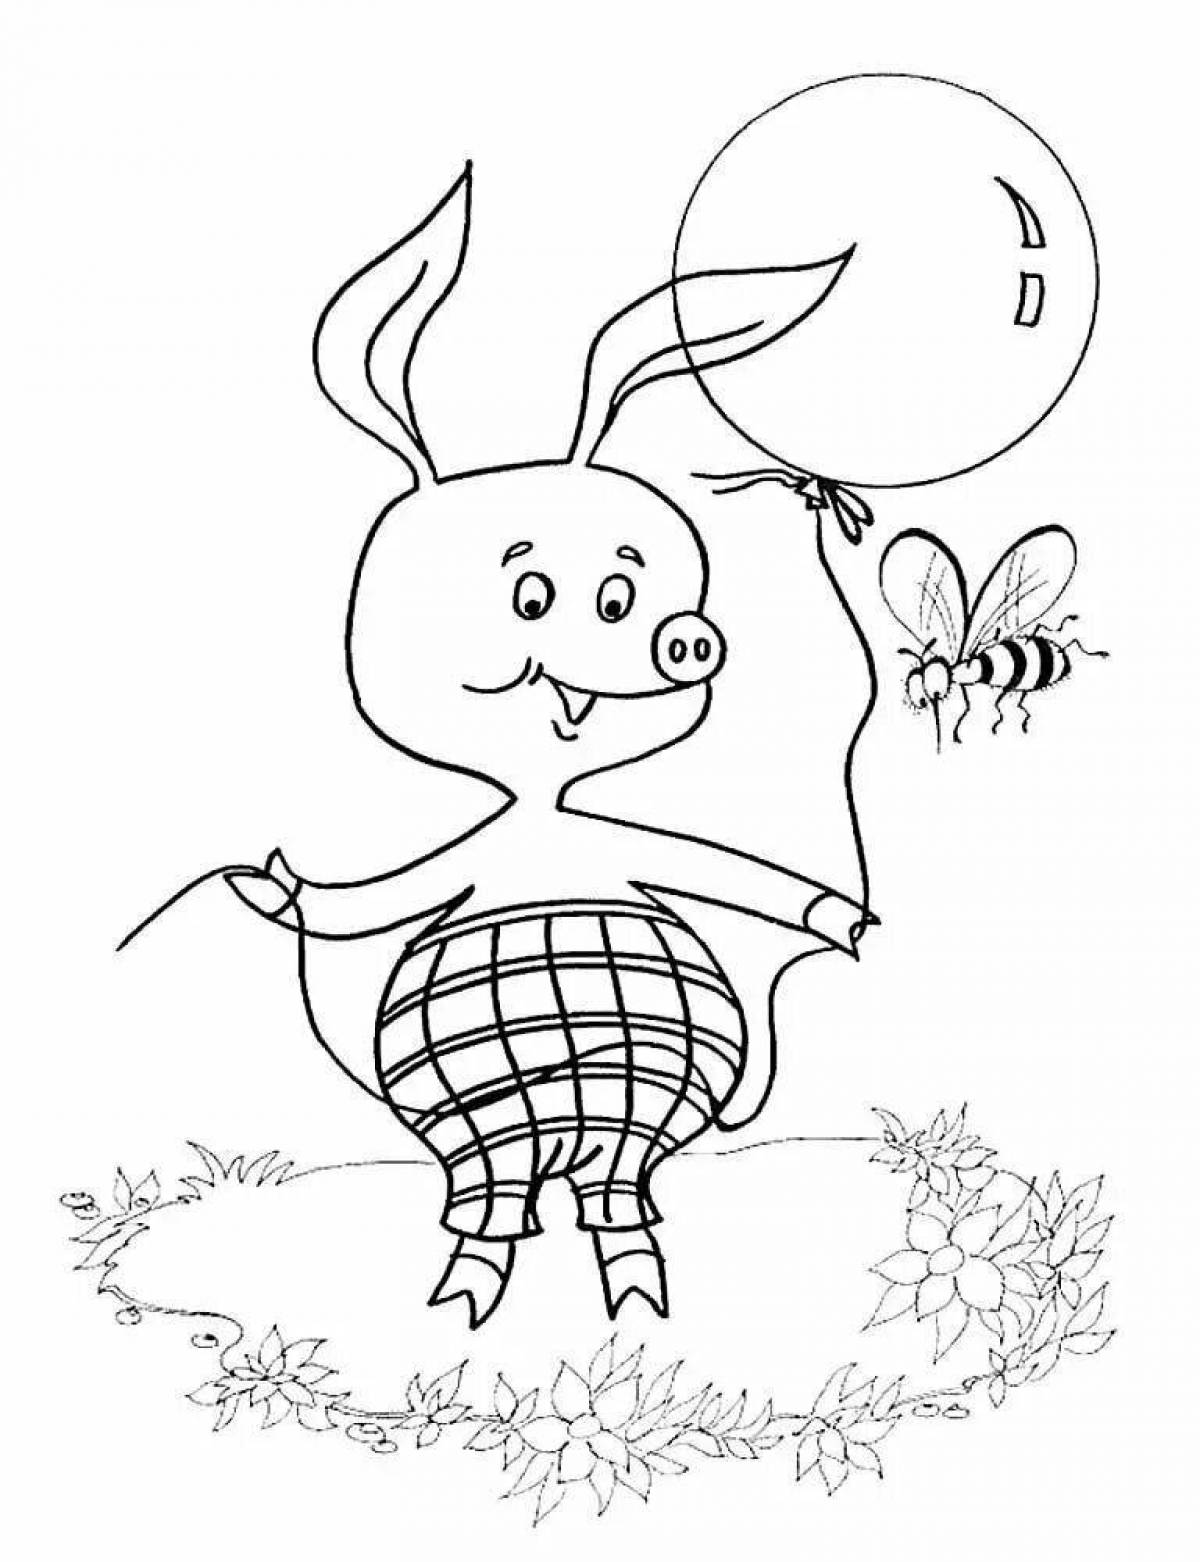 Exotic fairy tale characters coloring pages